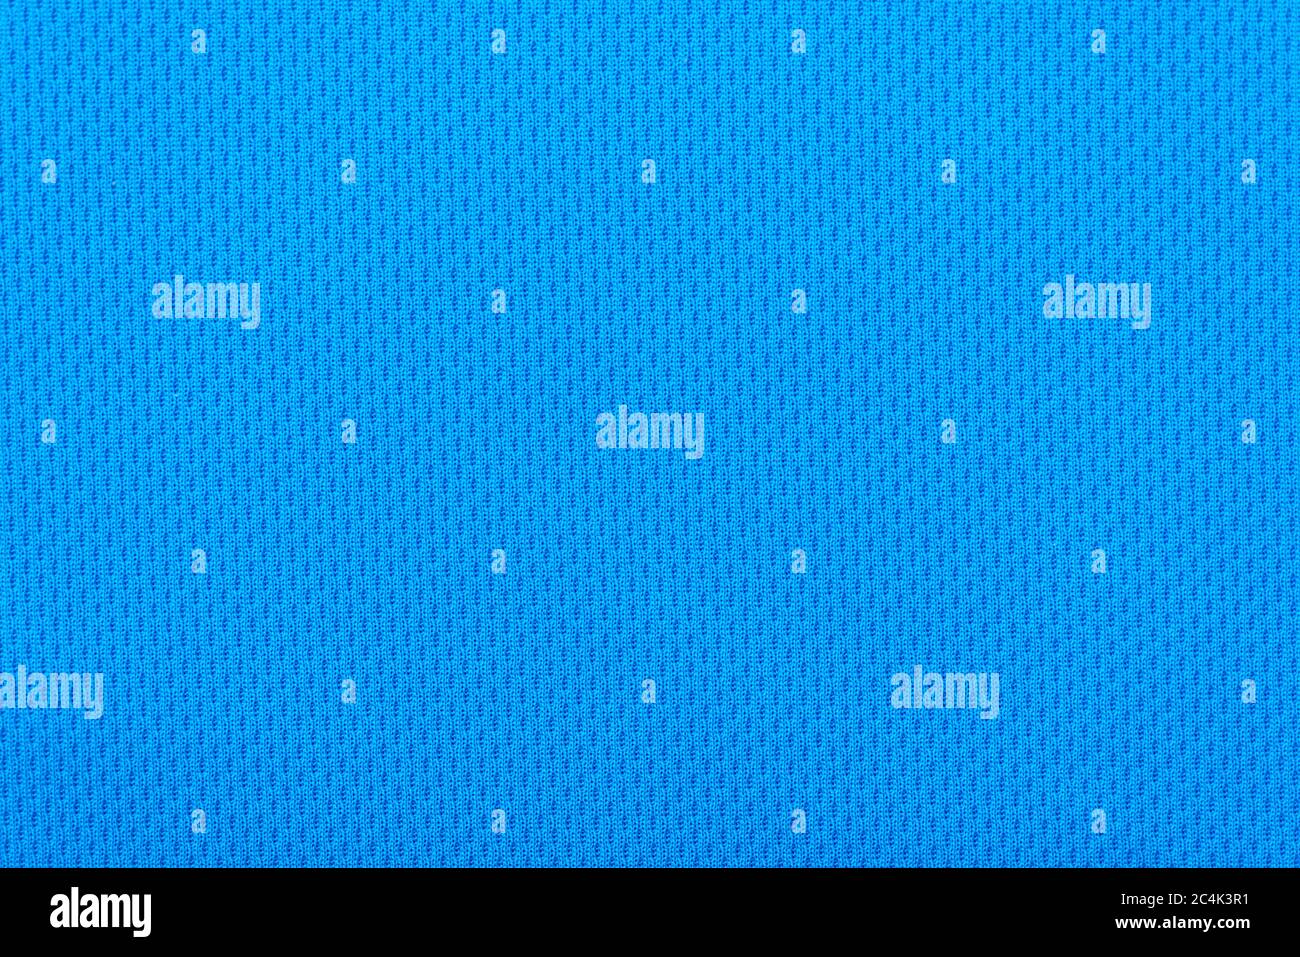 Smooth surface of a blue polyester sport t-shirt as background or texture Stock Photo